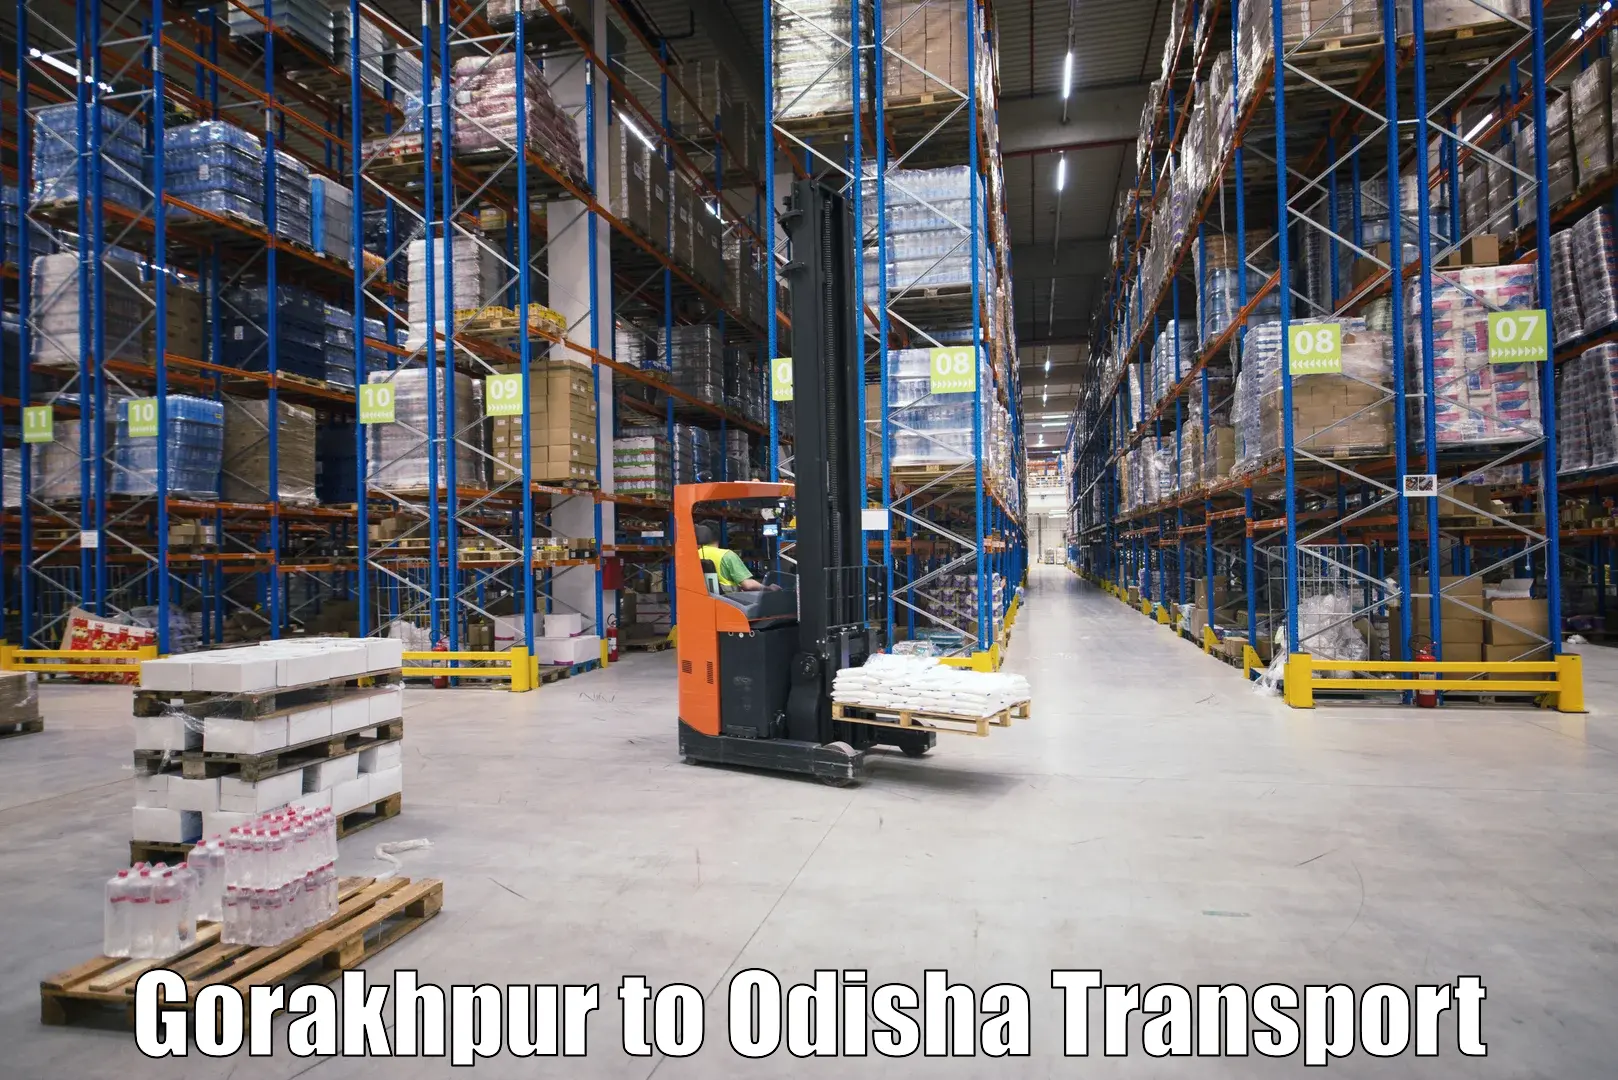 Transport bike from one state to another Gorakhpur to Odisha